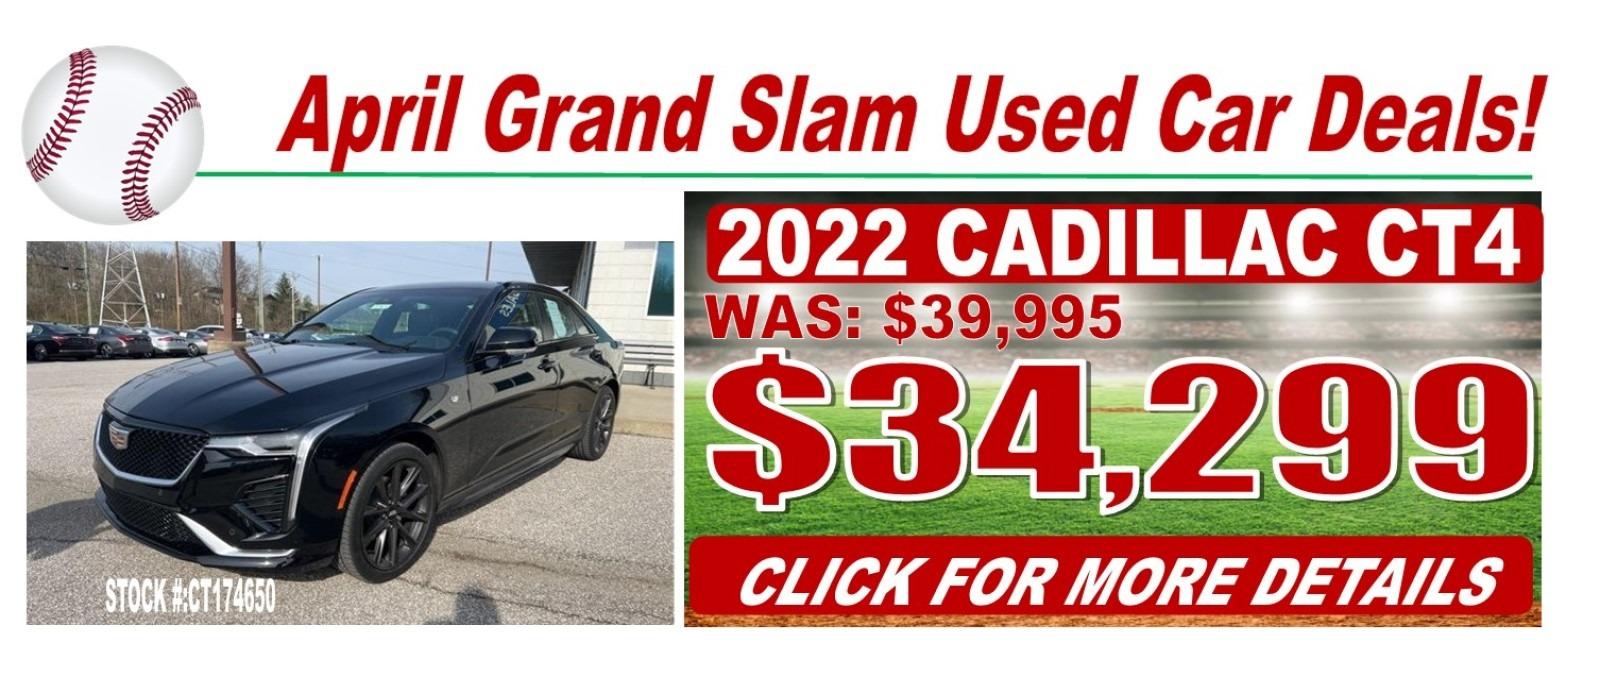 2022 Cadillac CT4 for $34,299